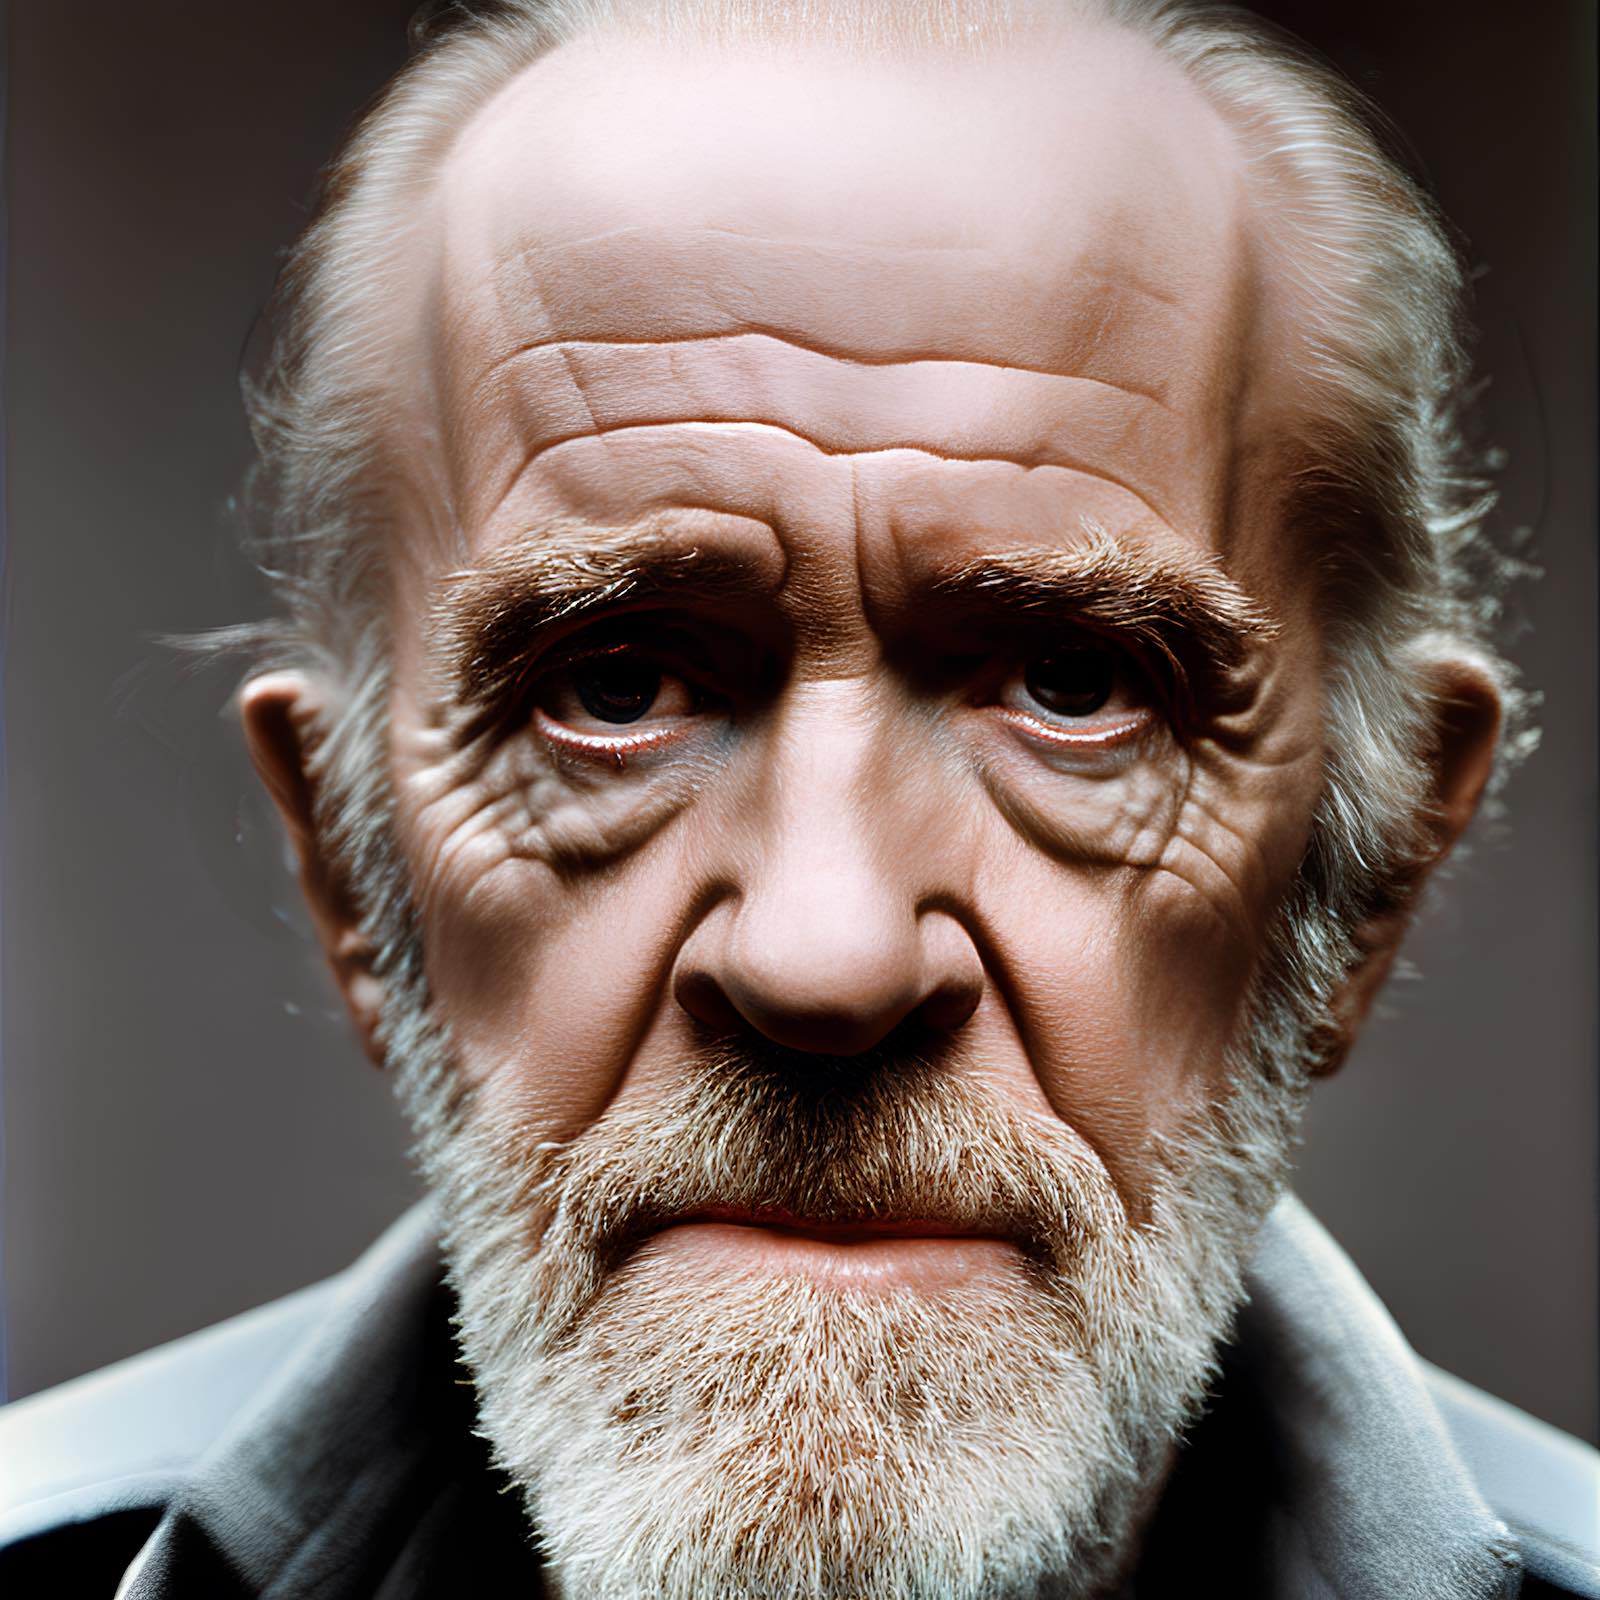 Oh and RIP Mr Carlin